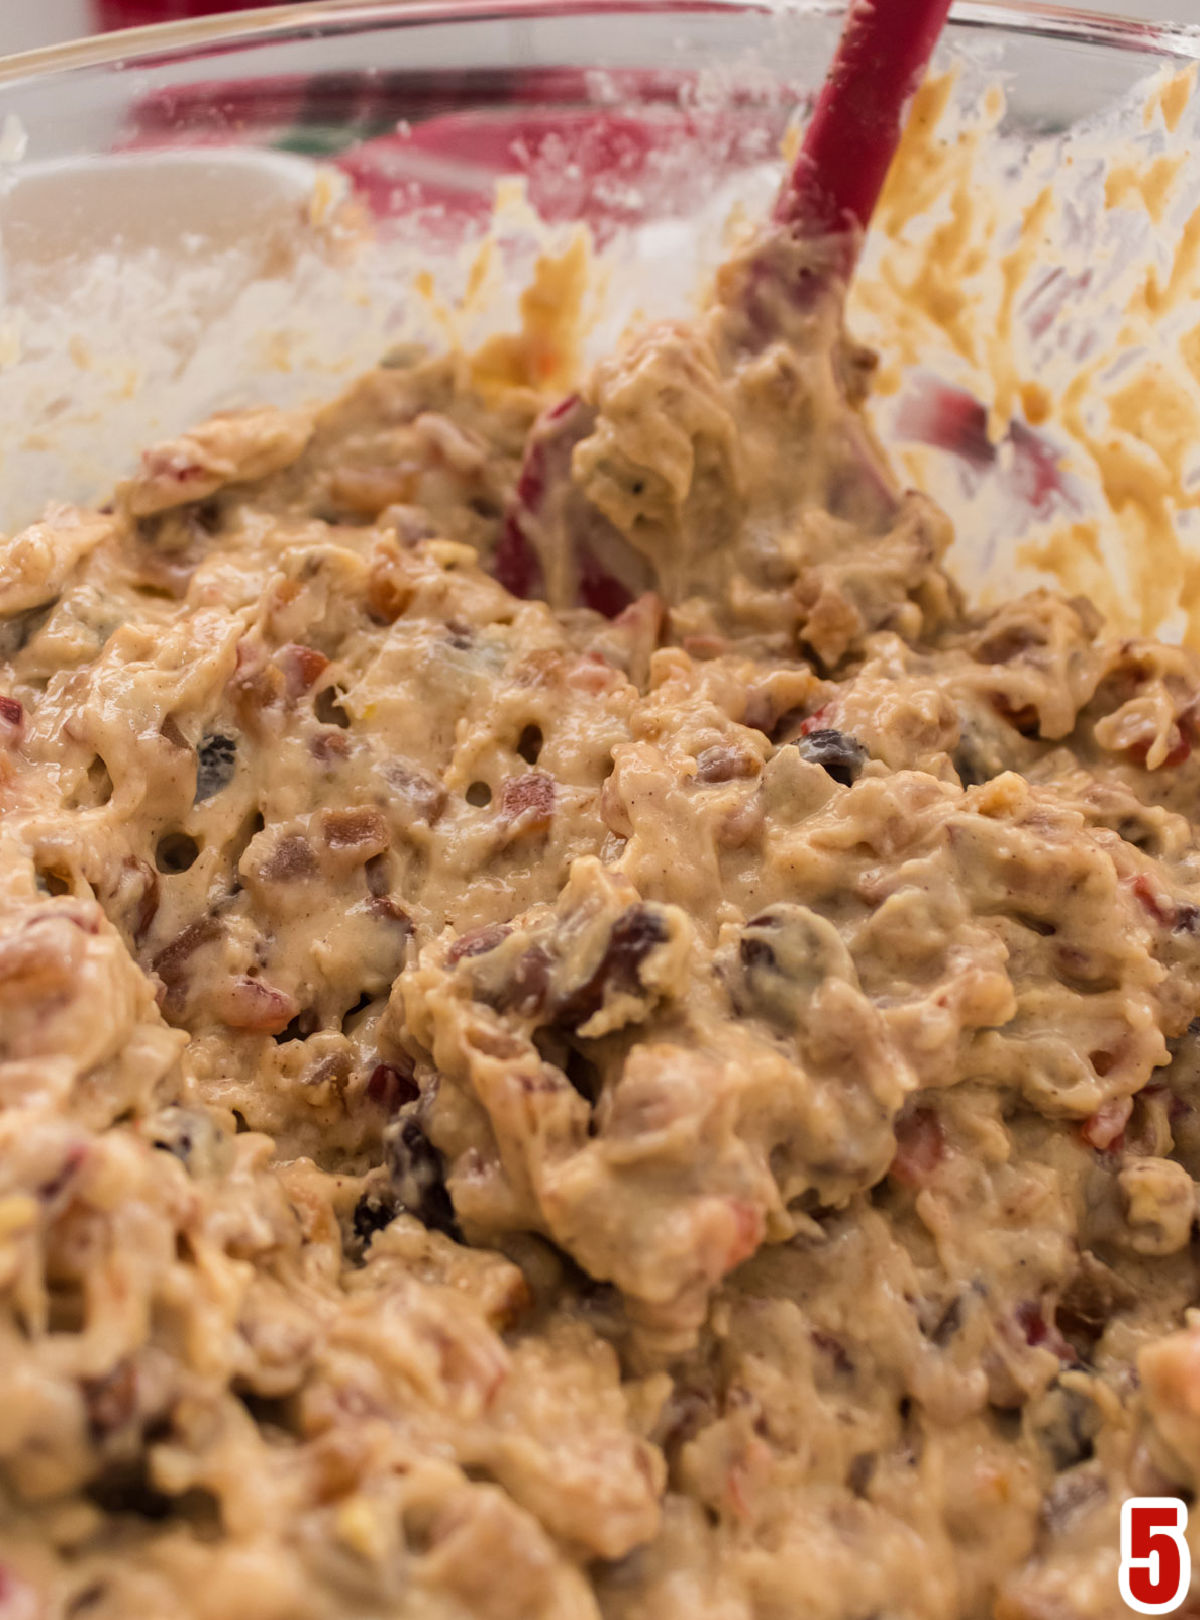 Closeup on a glass mixing bowl filled with Fruit Cake cake batter.